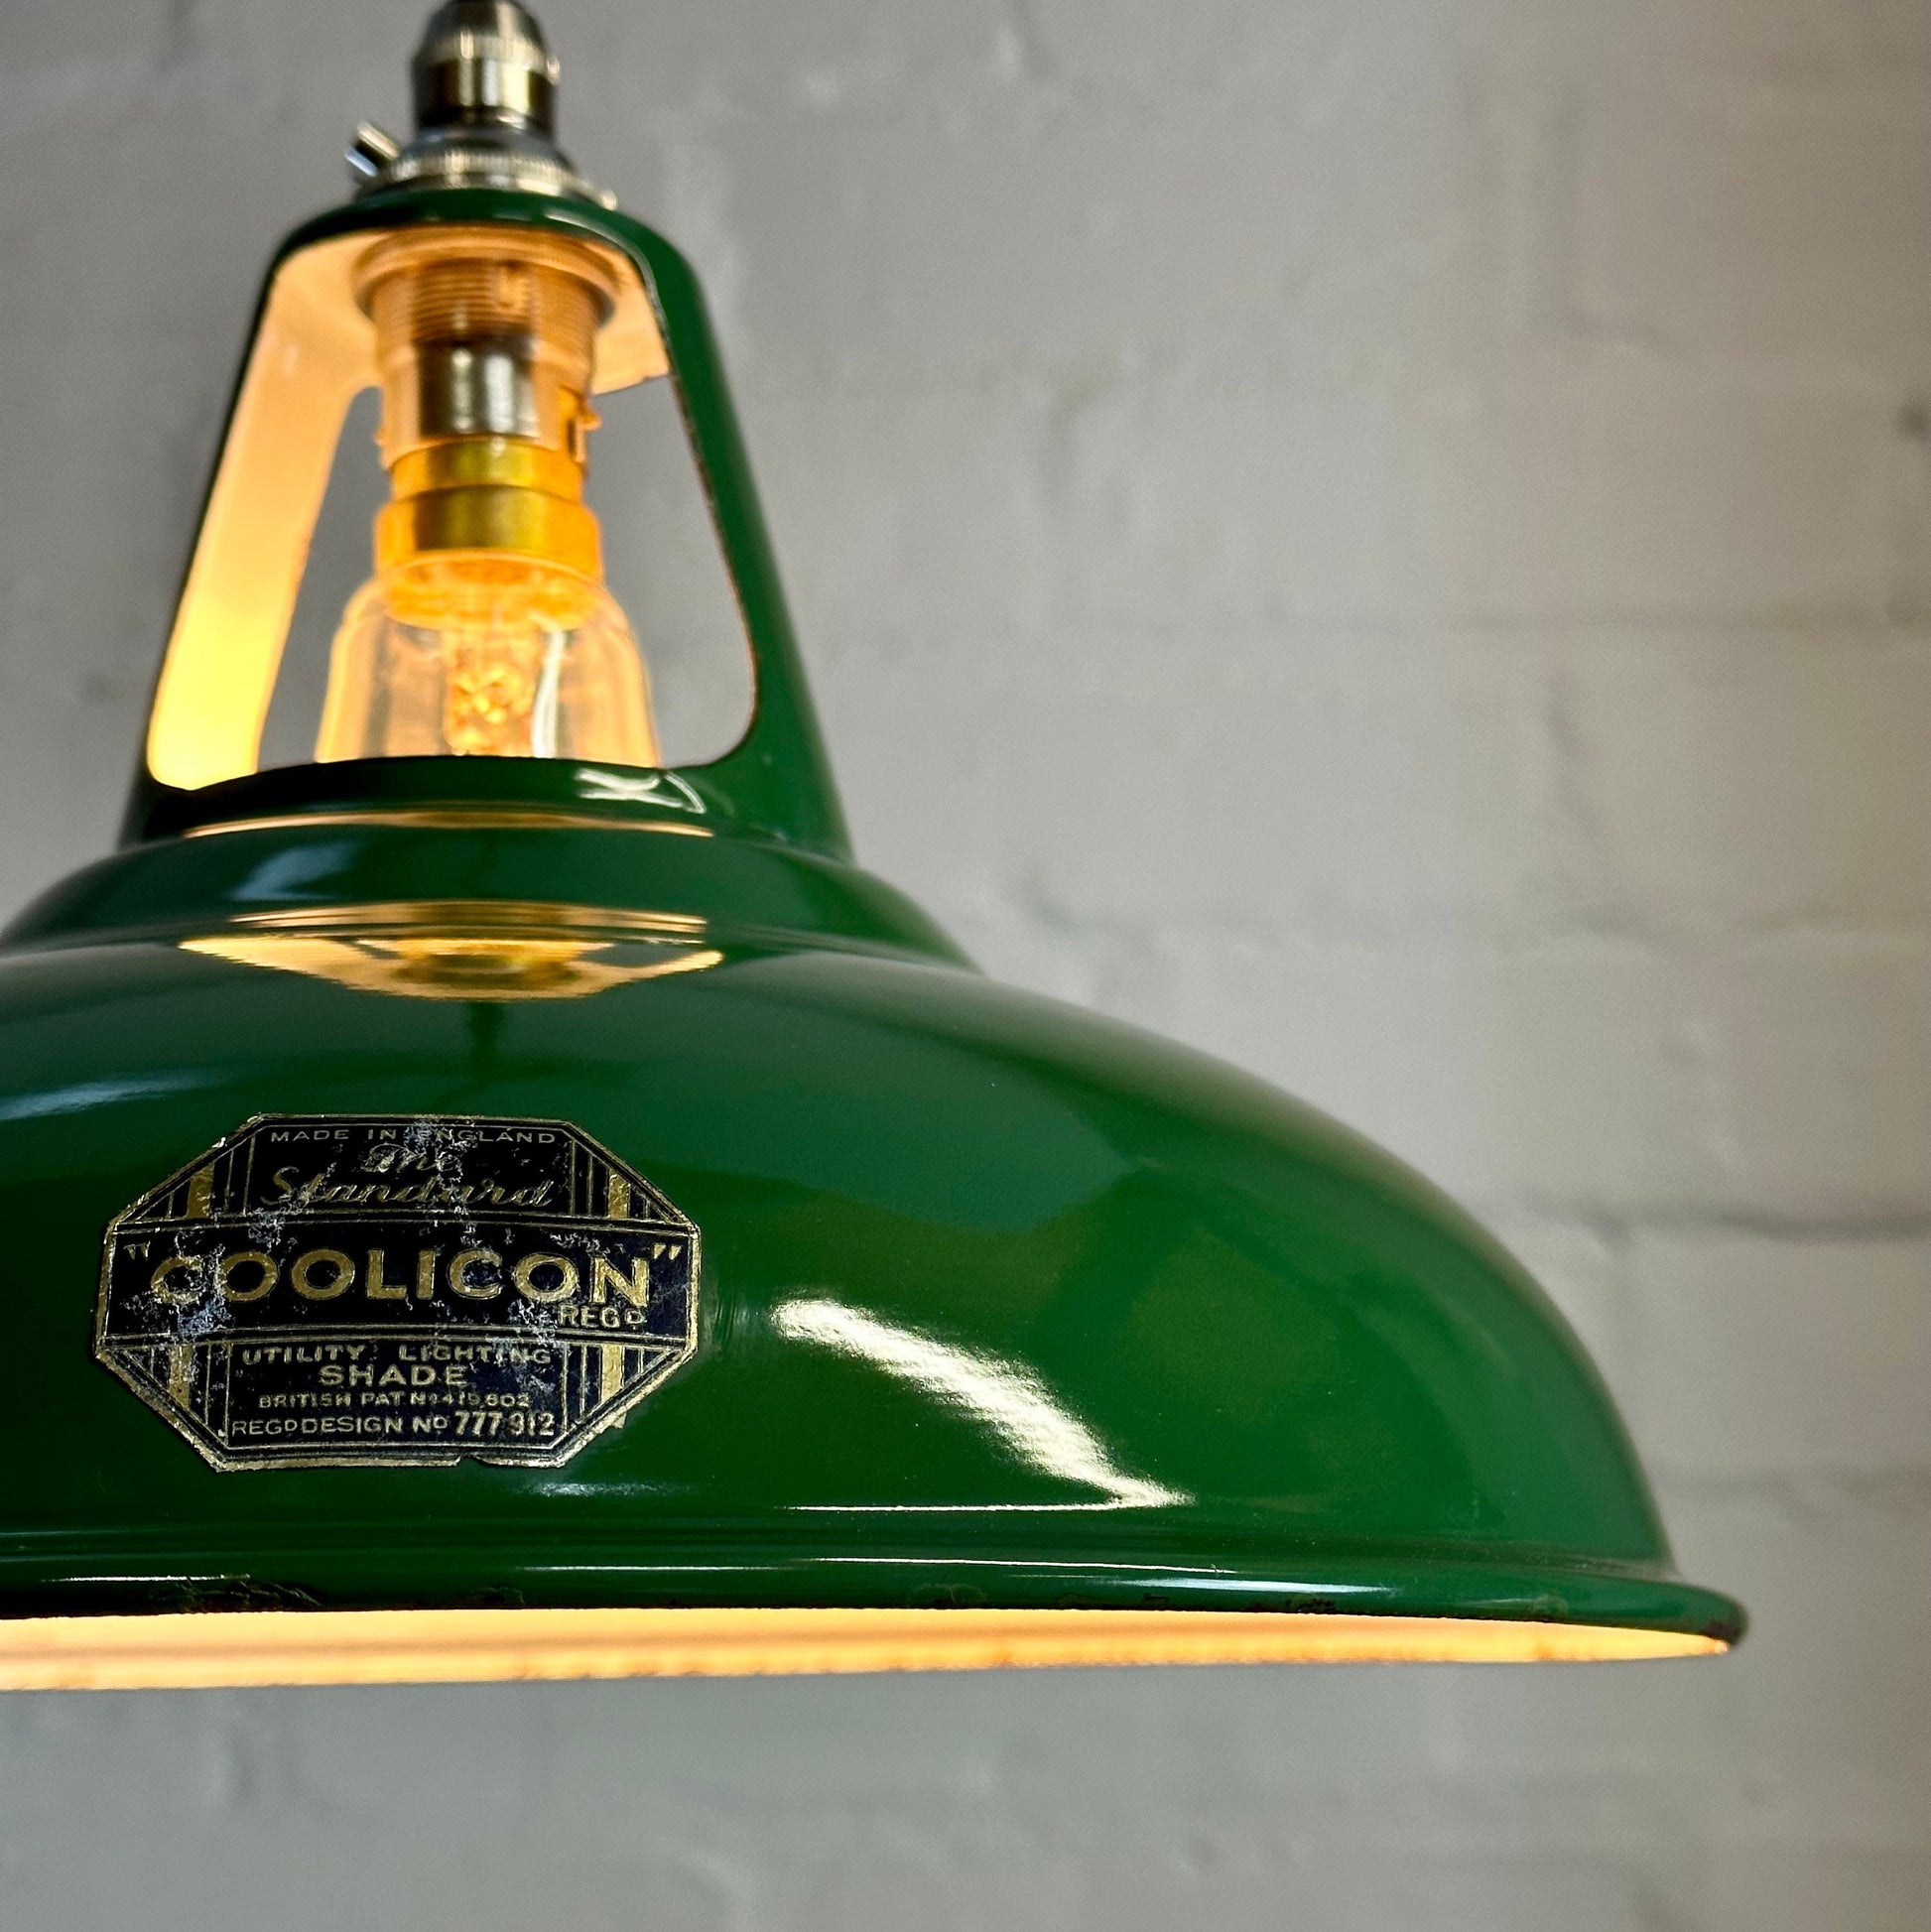 Geniune Green Solid Coolicon 1932 Lamp Shade Pendant Set Light 11 Inch | Ceiling Dining Room | Kitchen Table | Vintage Filament Bulb